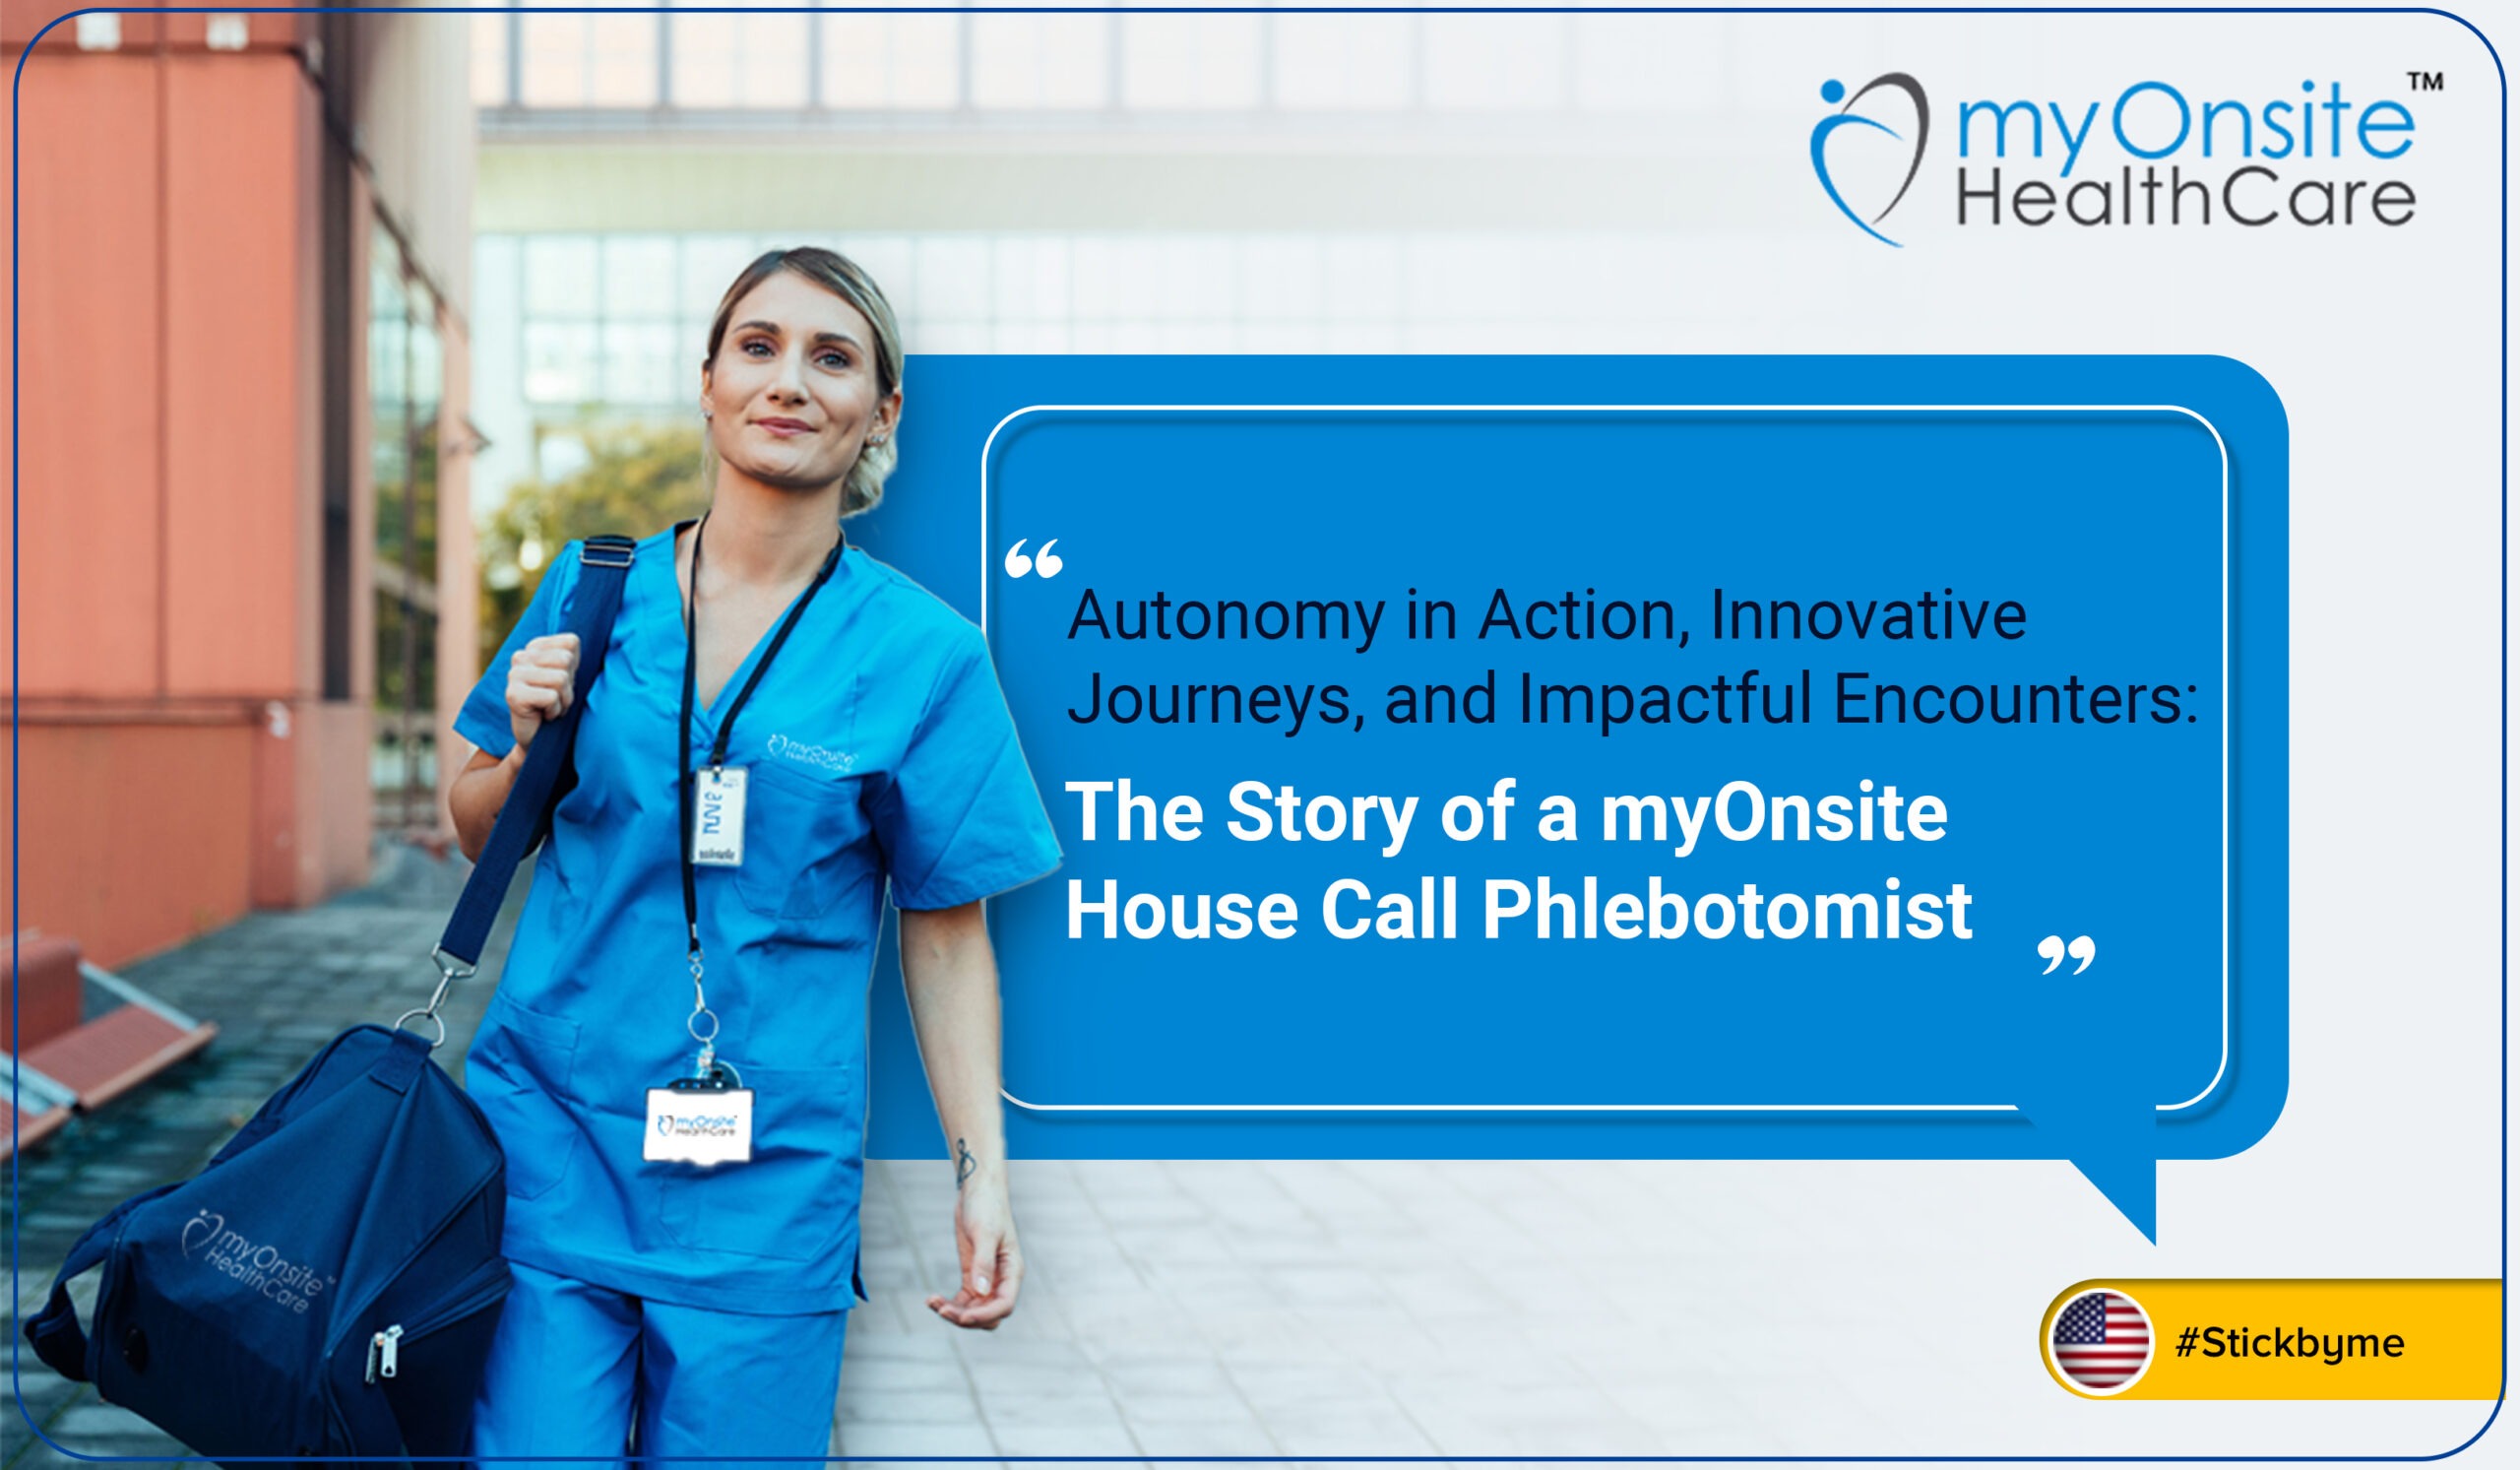 Autonomy in Action, Innovative Journeys, and Impactful Encounters: The Story of a myOnsite House Call Phlebotomist